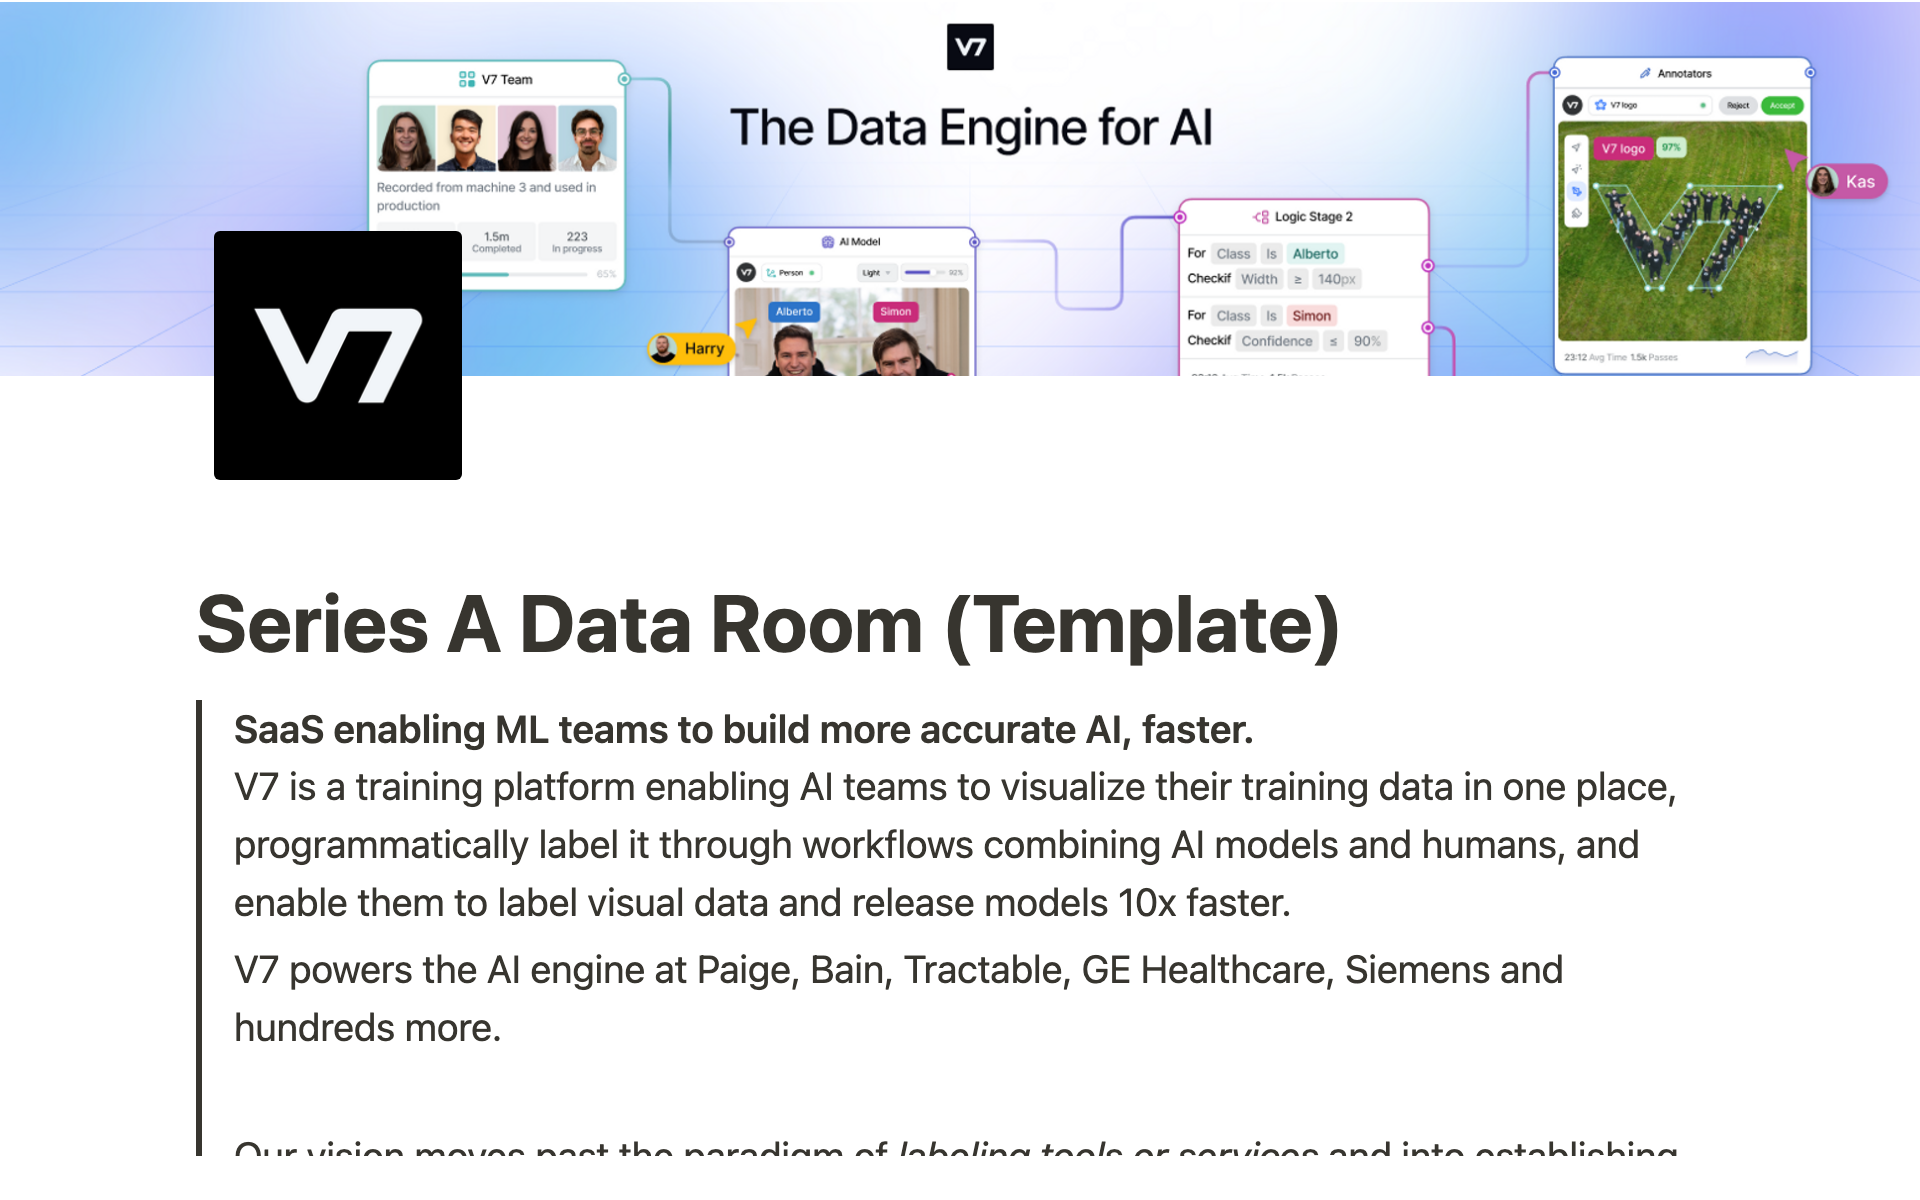 Series A Data Room Notion Template